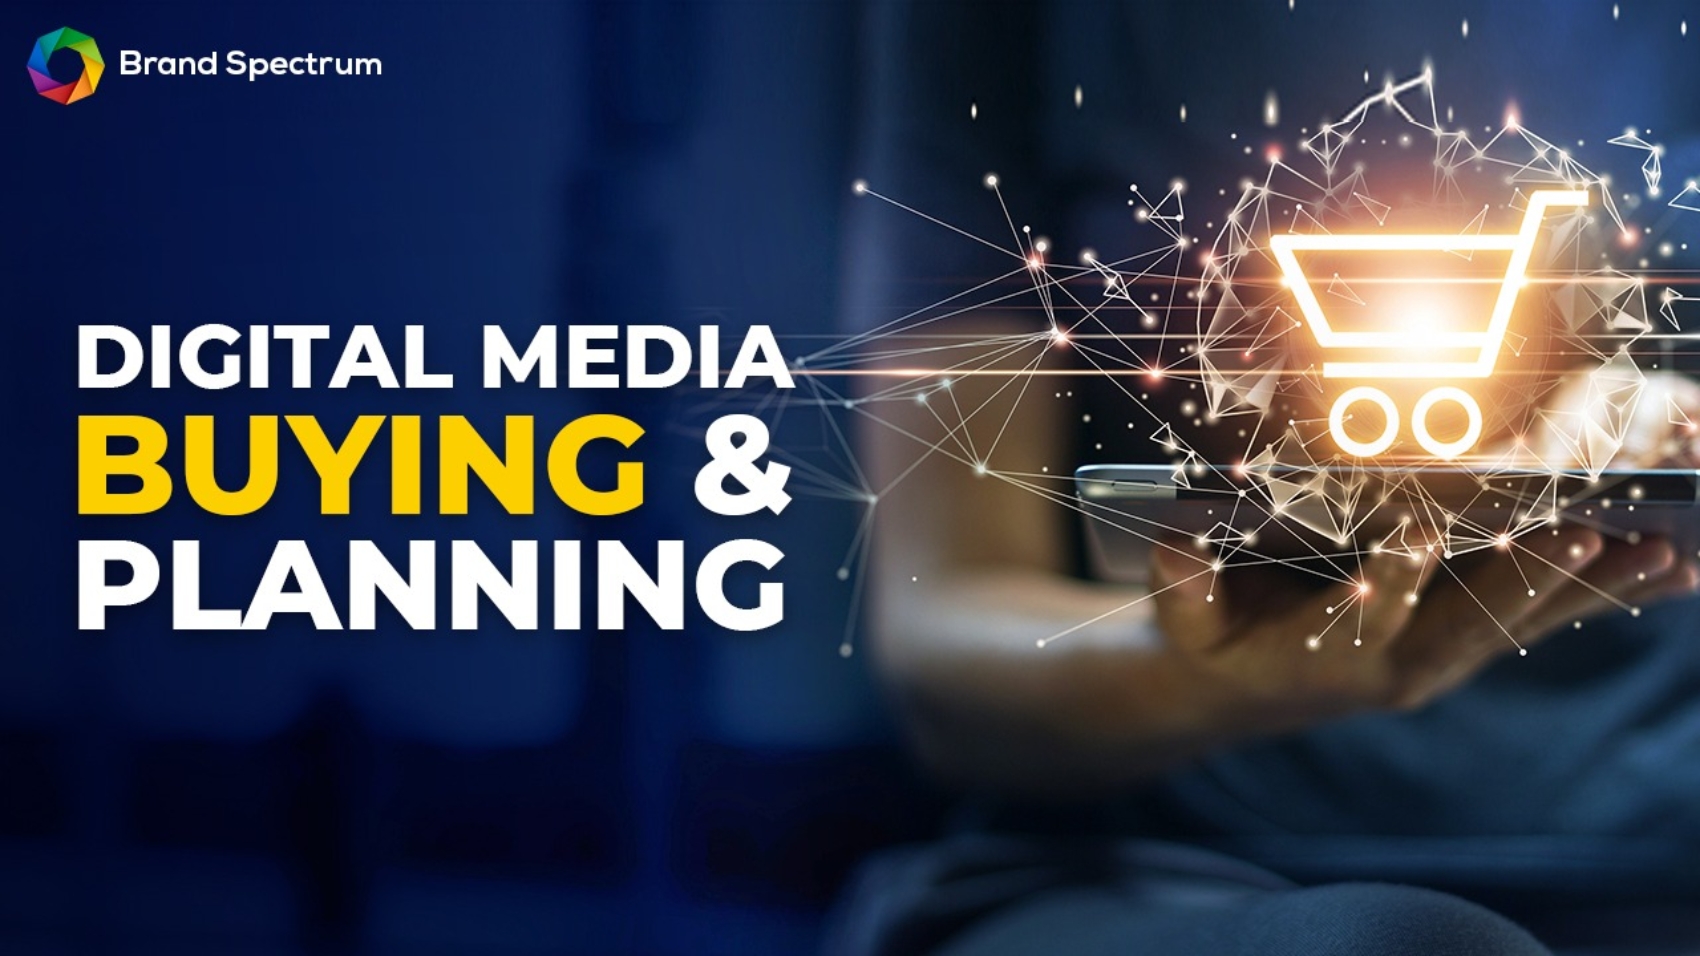 Digital Media Buying and Planning Services by Brand Spectrum